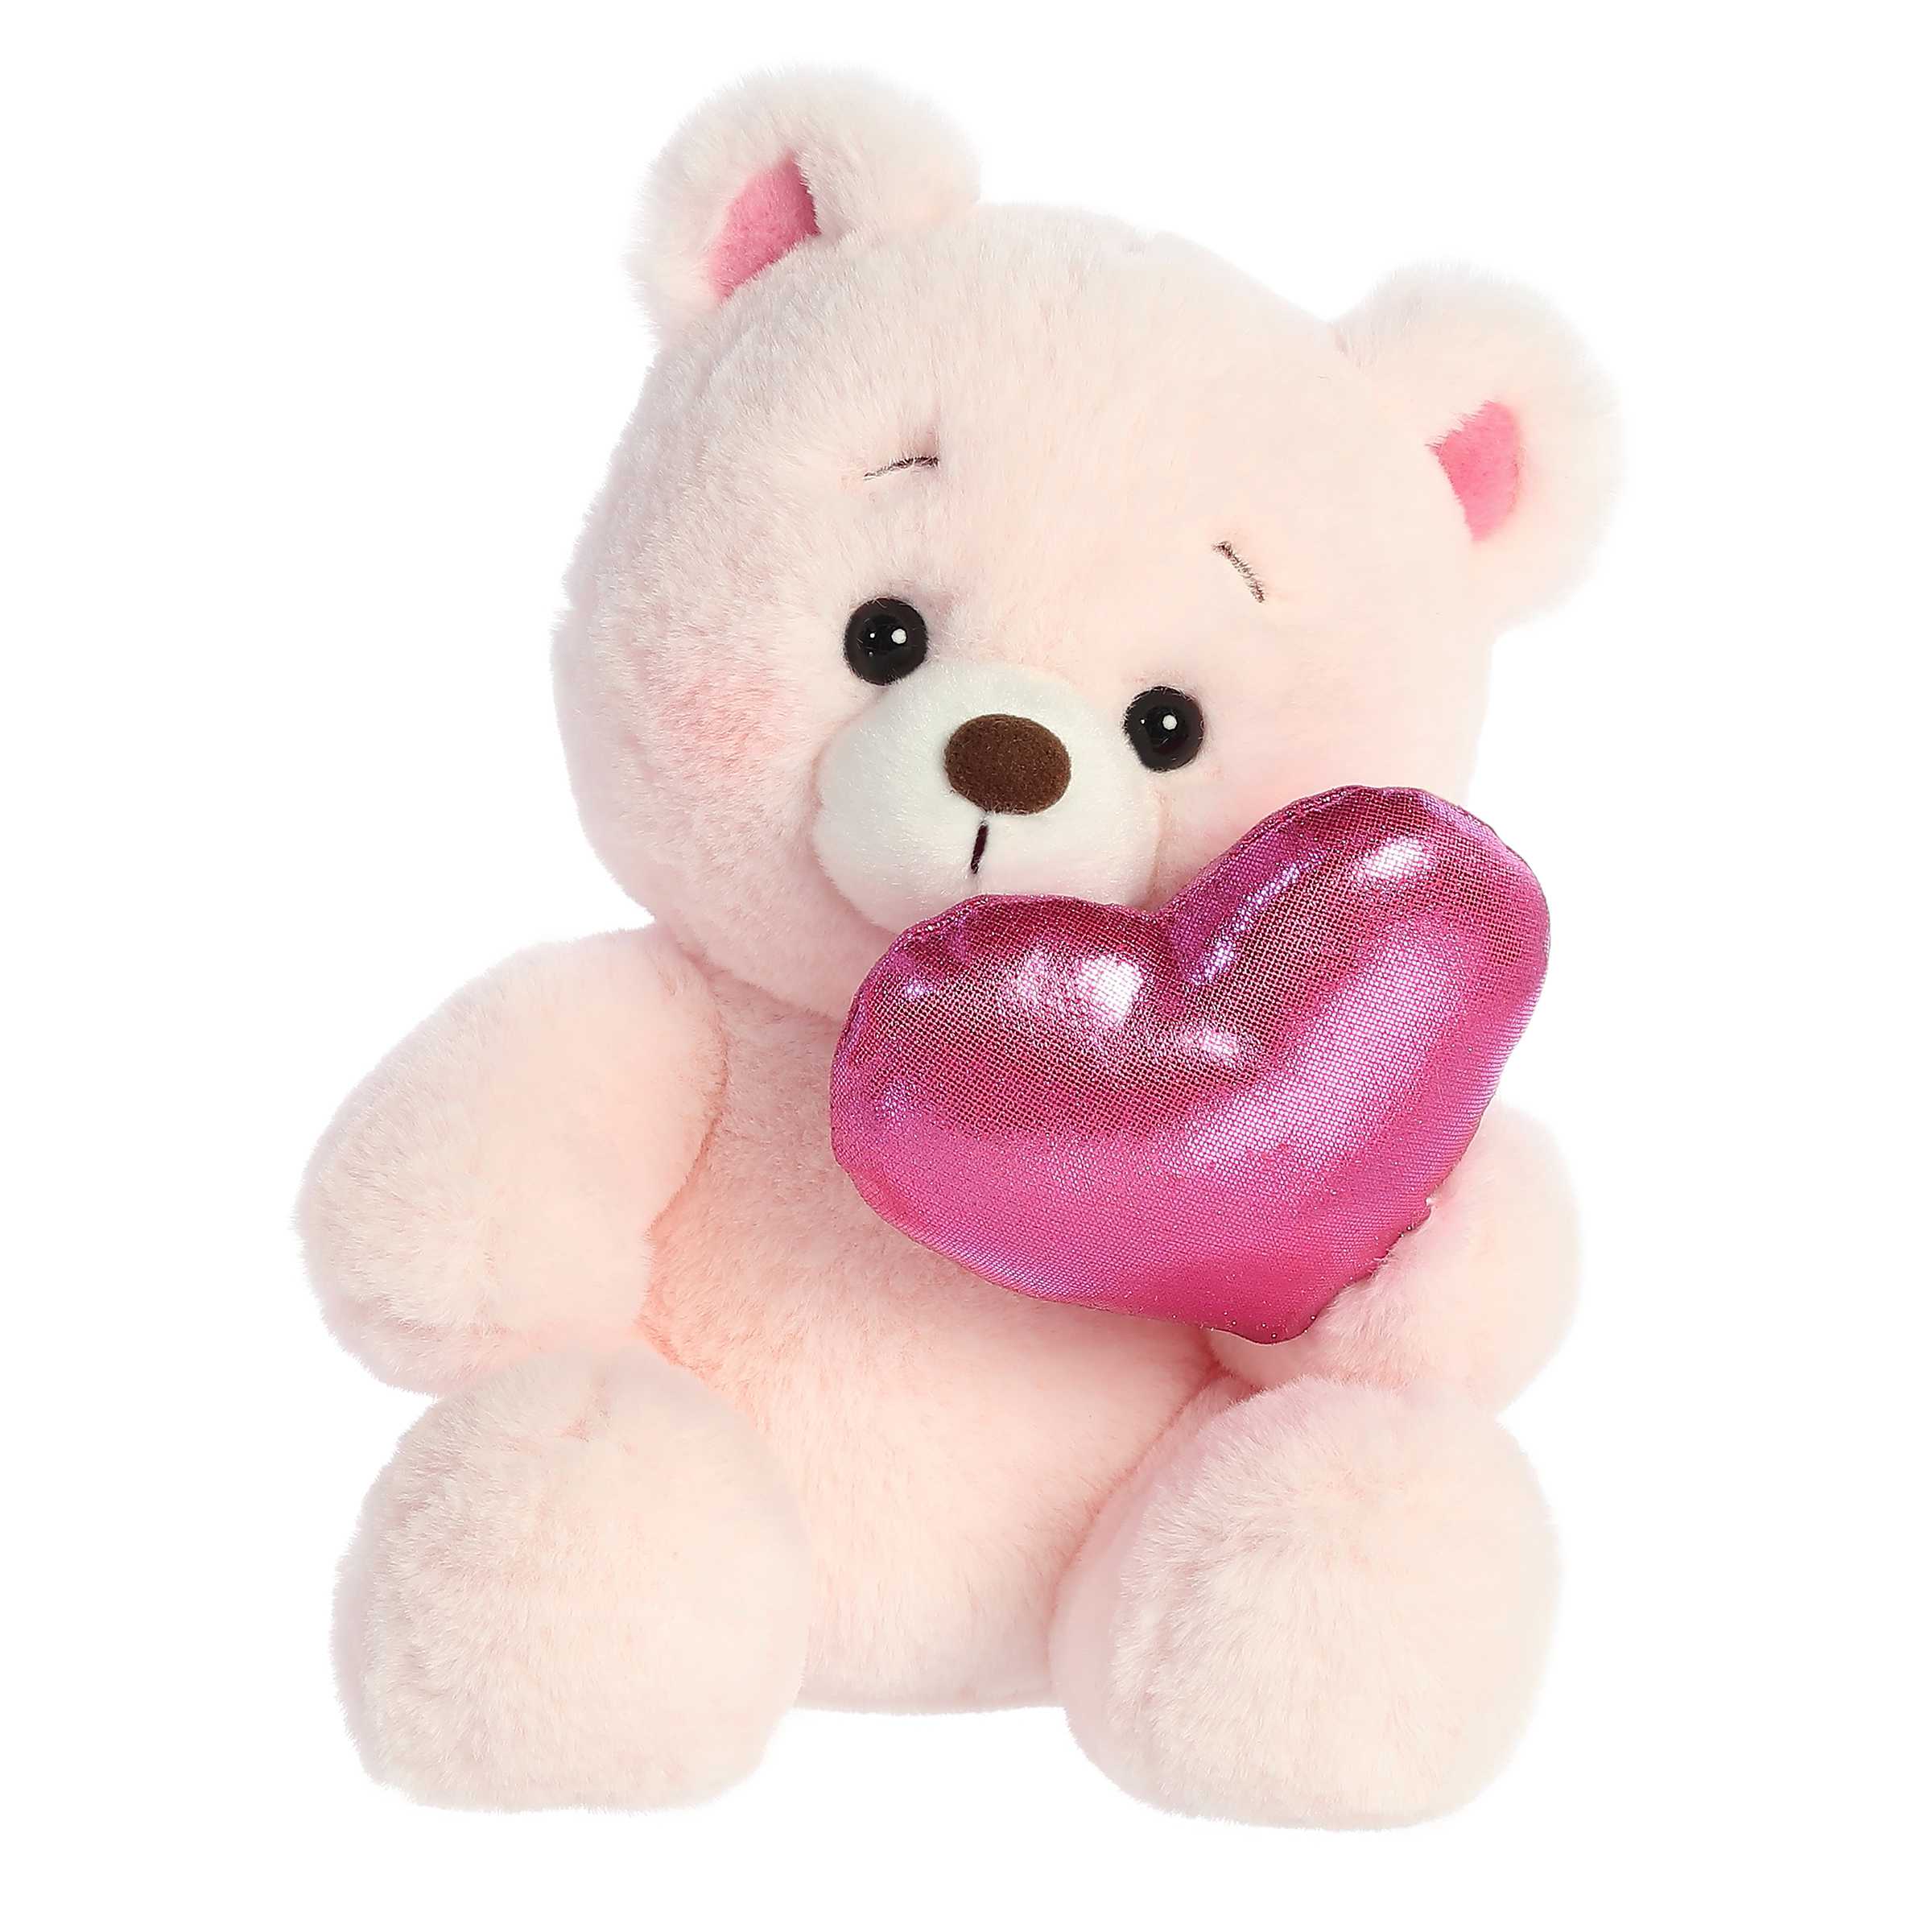 Soft, pink-furred Bashful Bear plush, holding a red heart and blushing, embodying charm and affection for Valentine's Day